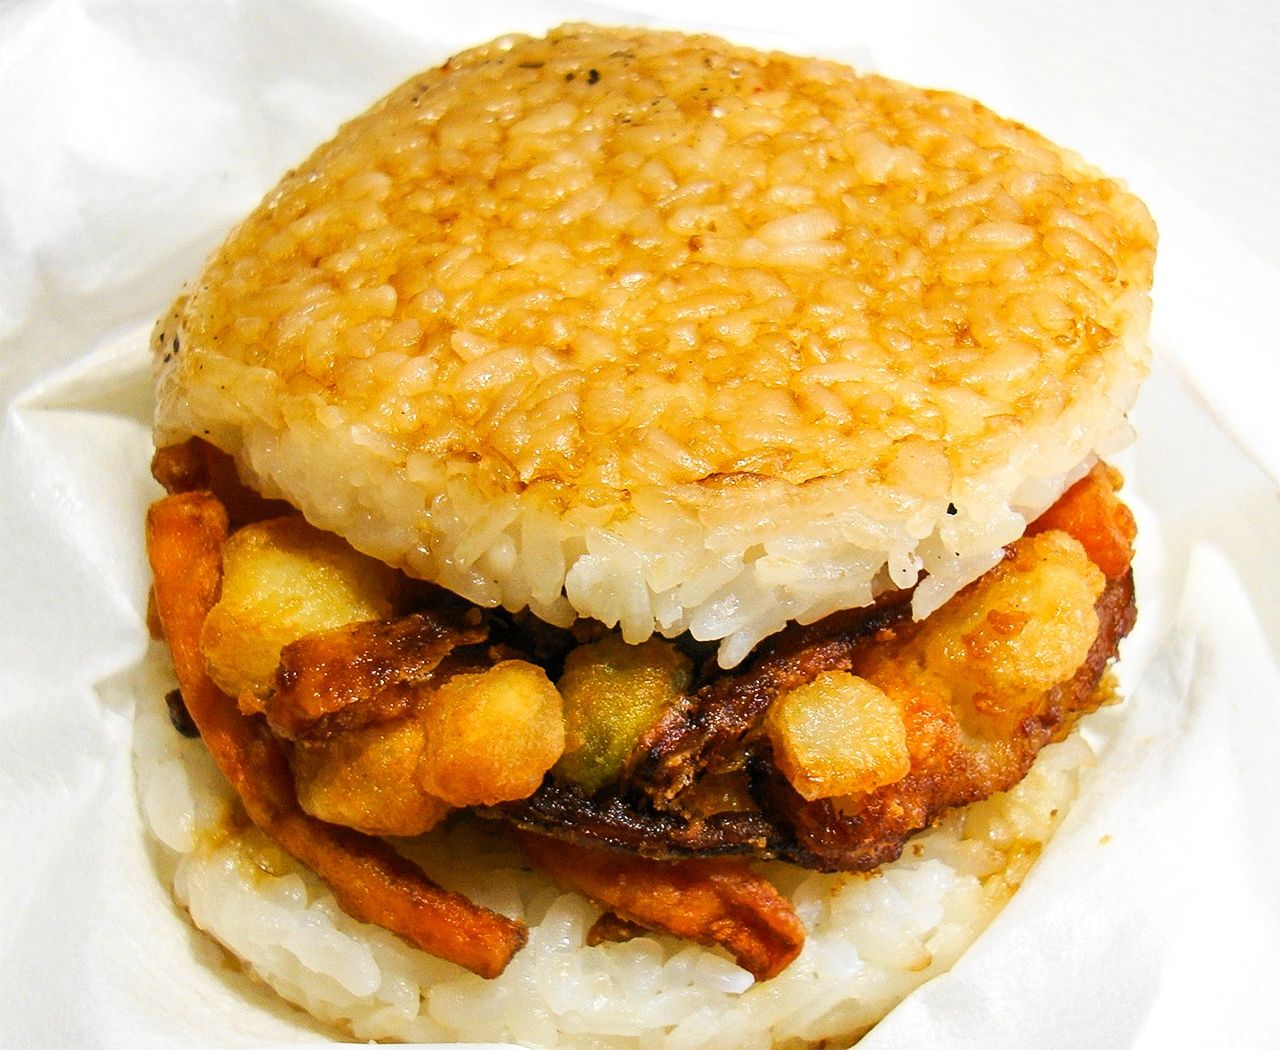 One of the many different types of rice burgers available from fast food chain Mos Burger.